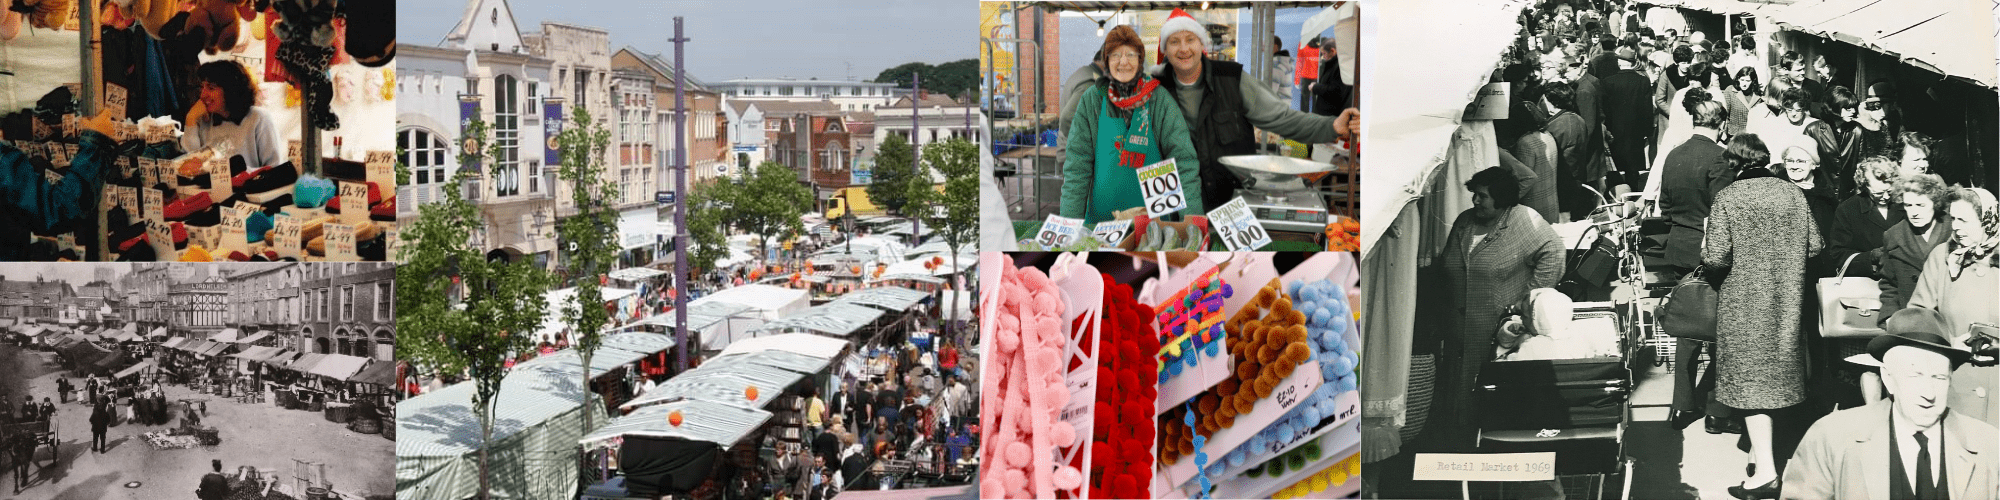 Collage banner featuring images of Loughborough market, including vegetable and fabric stalls. Two black and white photos of the market in the past.